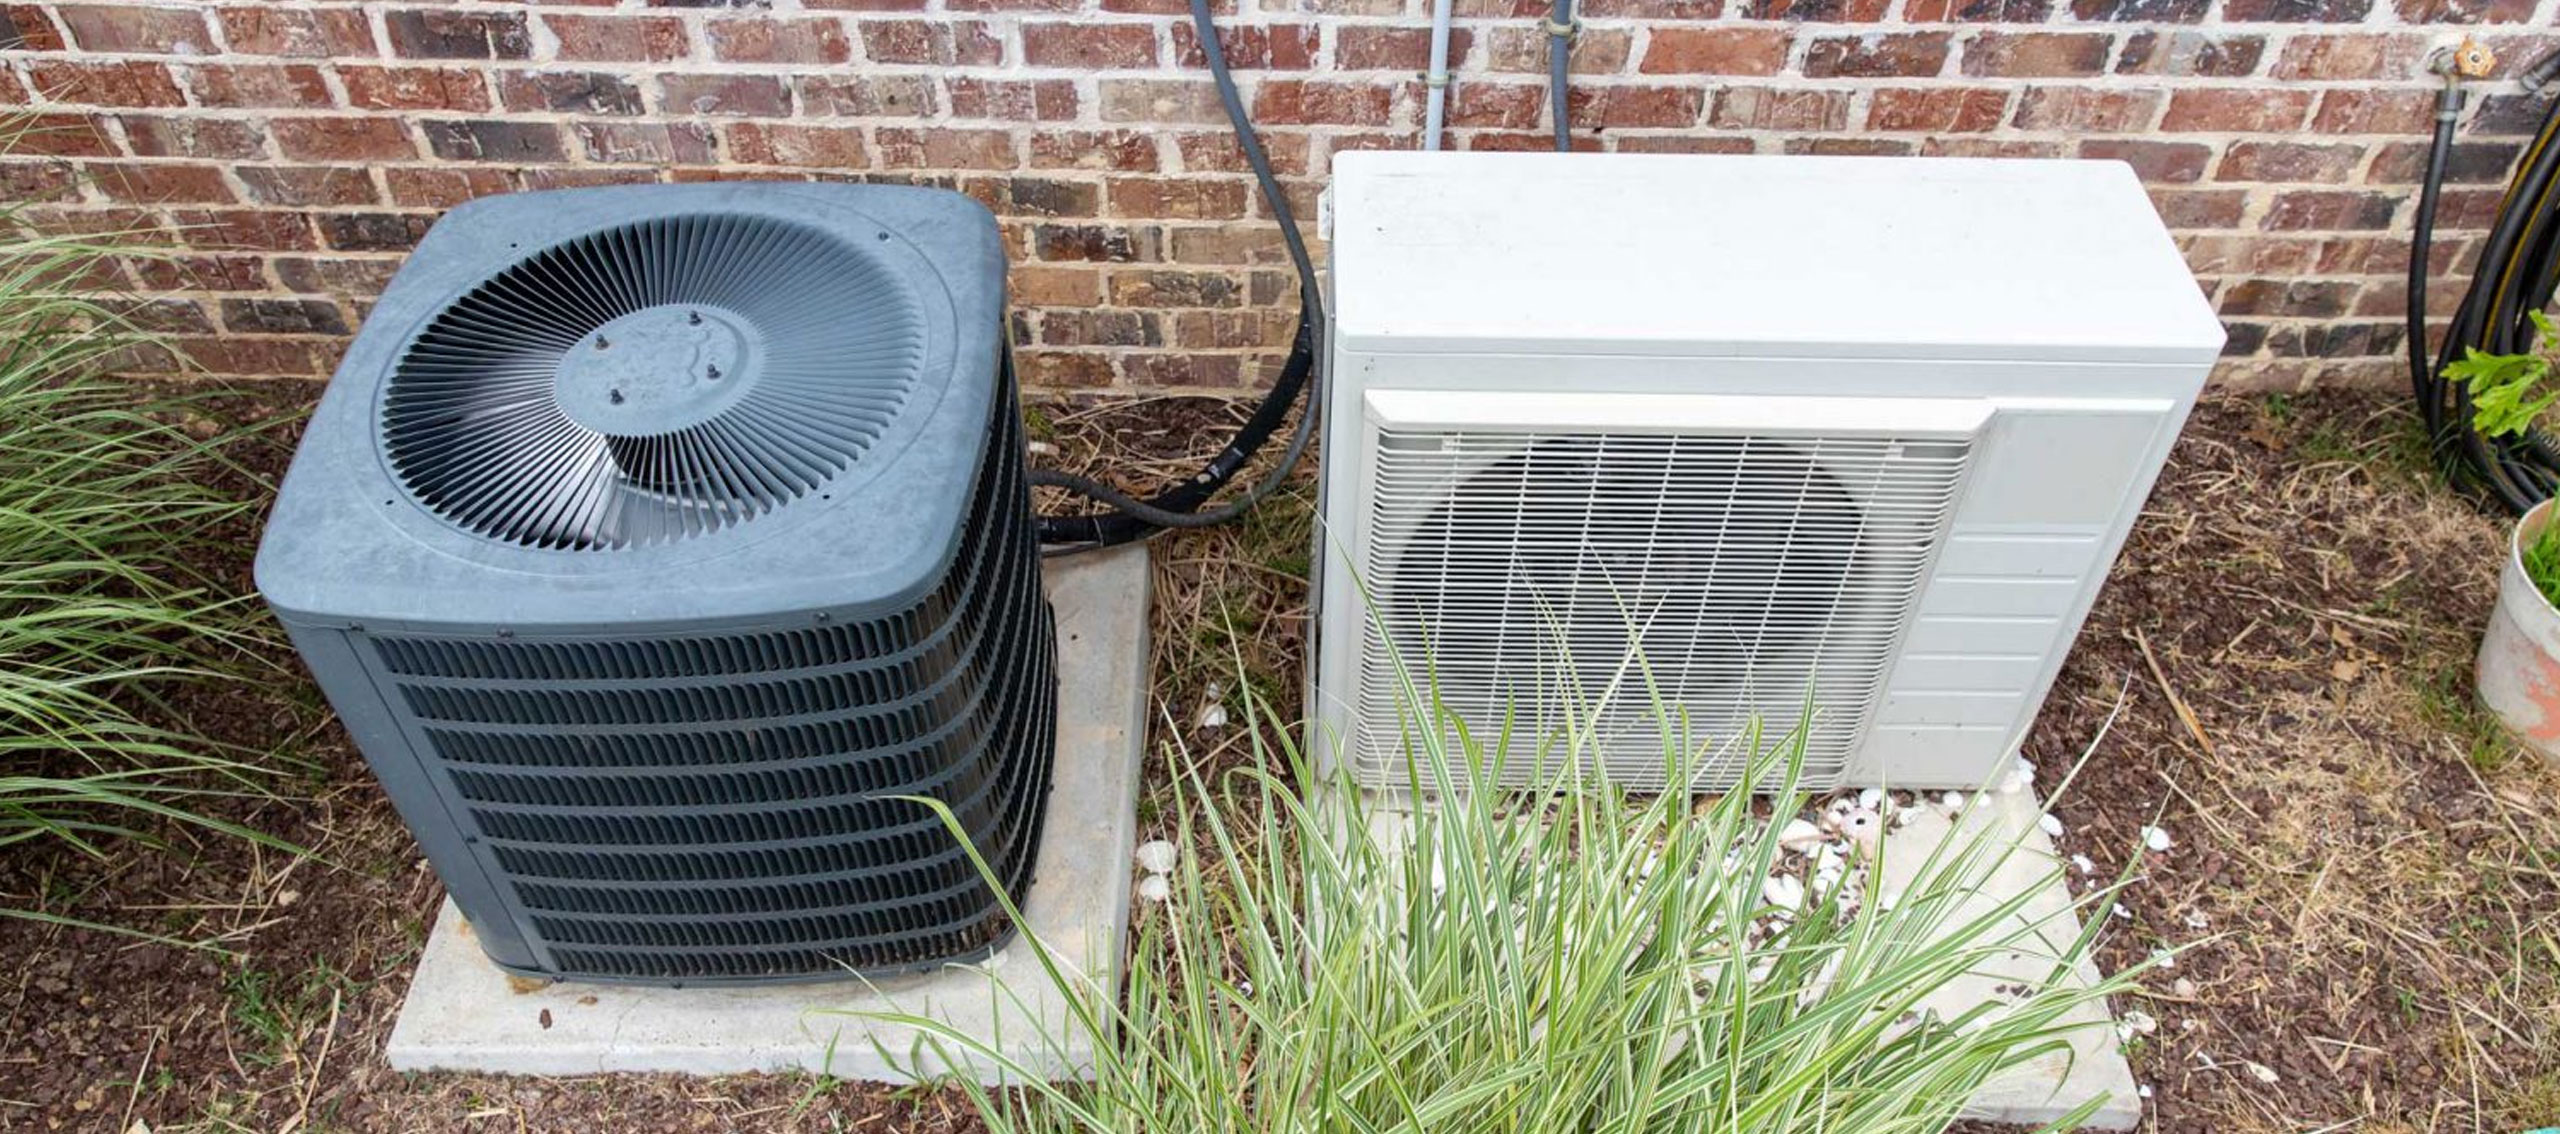 Ductless Mini Split Vs Central Air Hvac Systems Gree Comfort